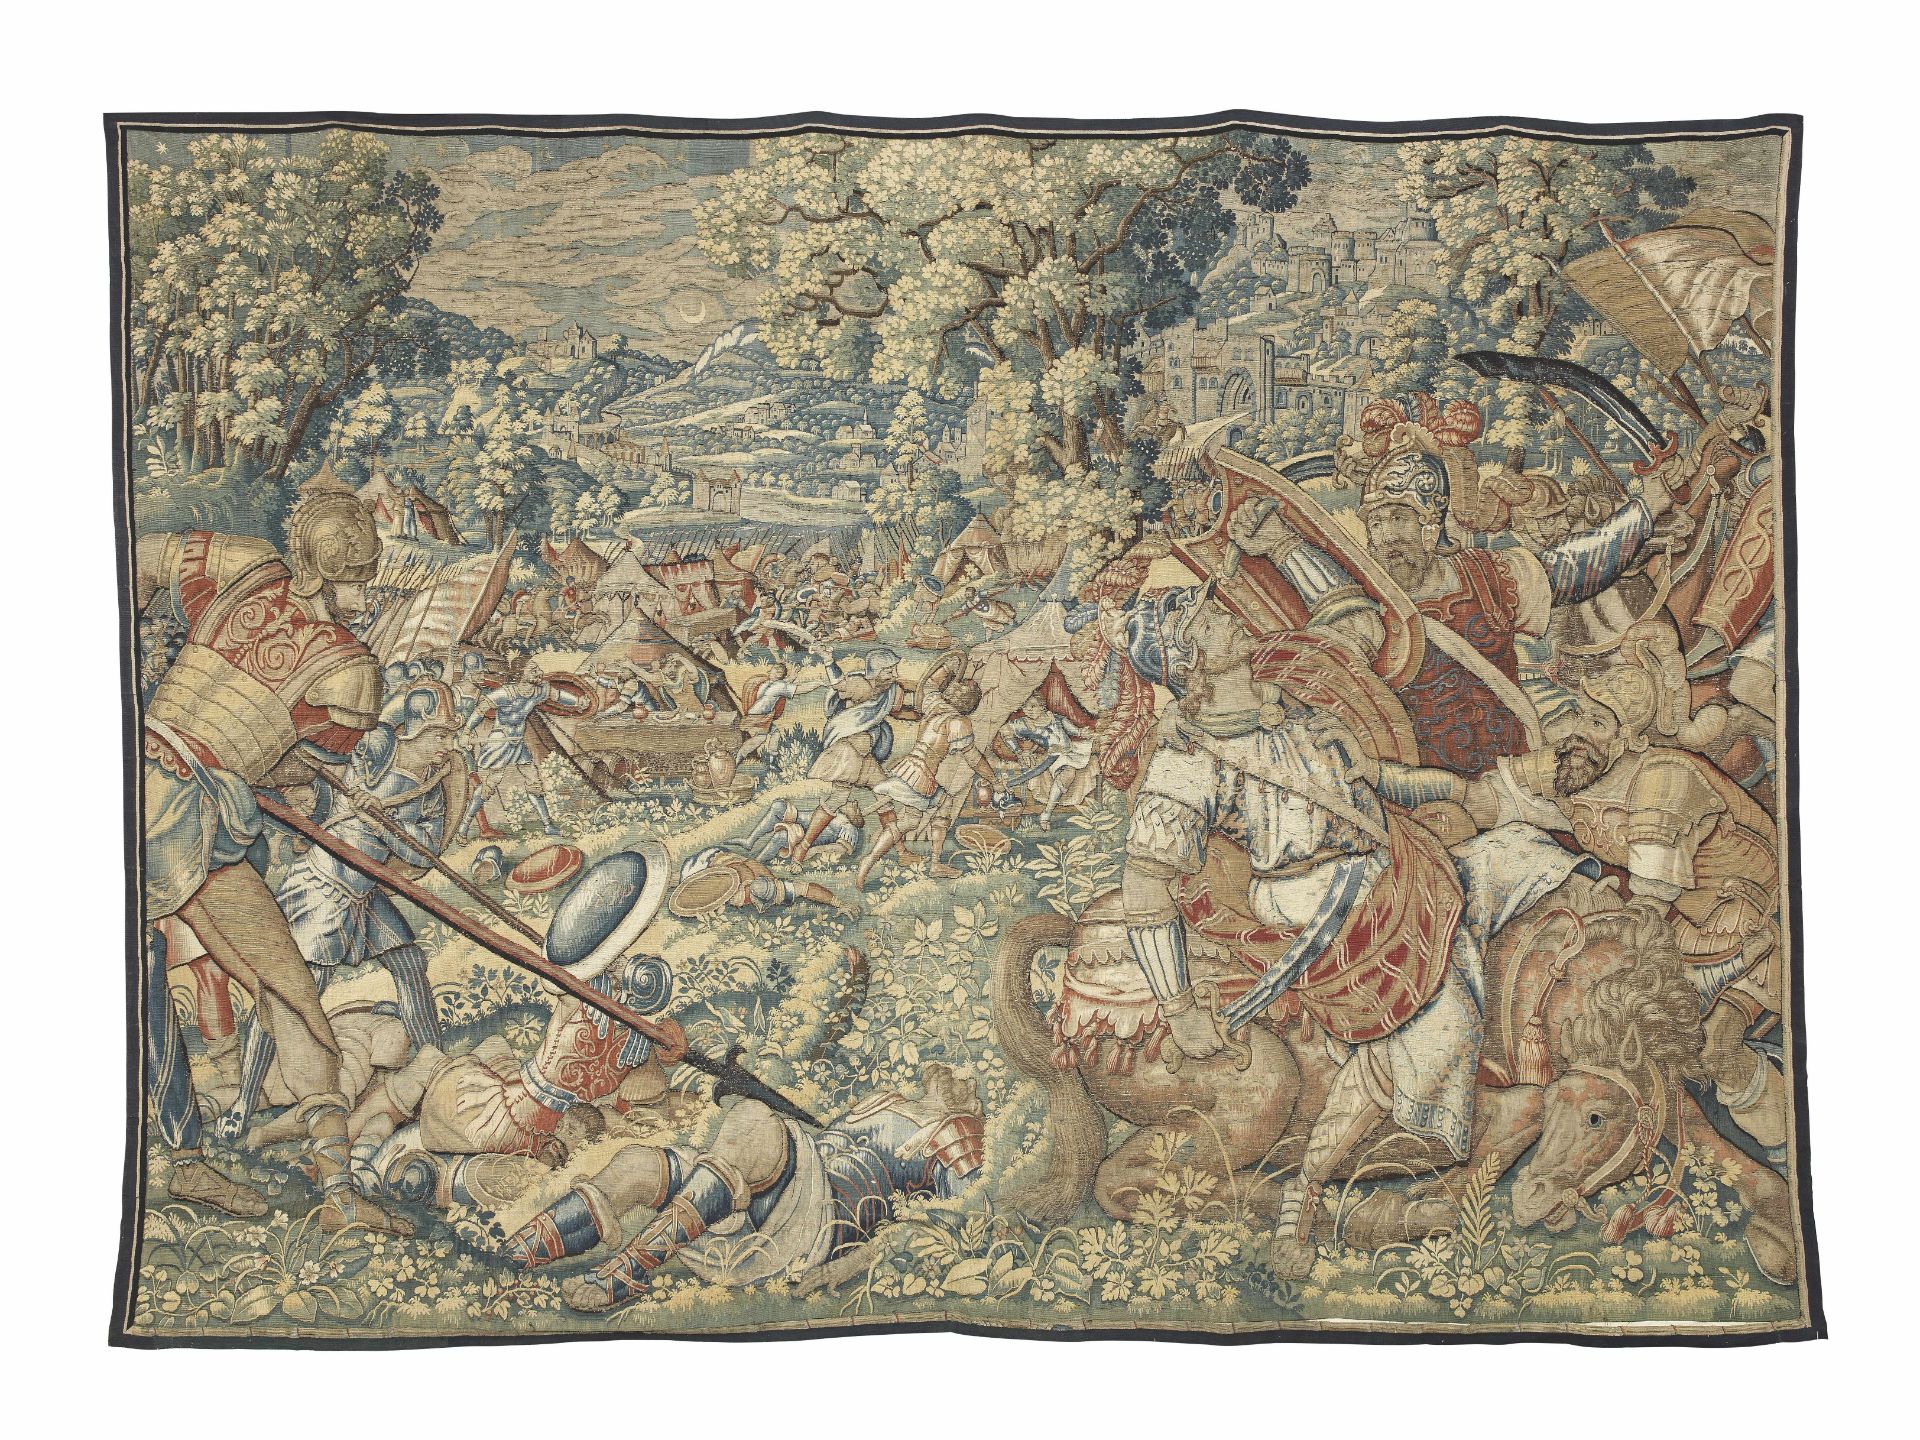 A striking mythological, military Flemish tapestry Late 16th/early 17th century